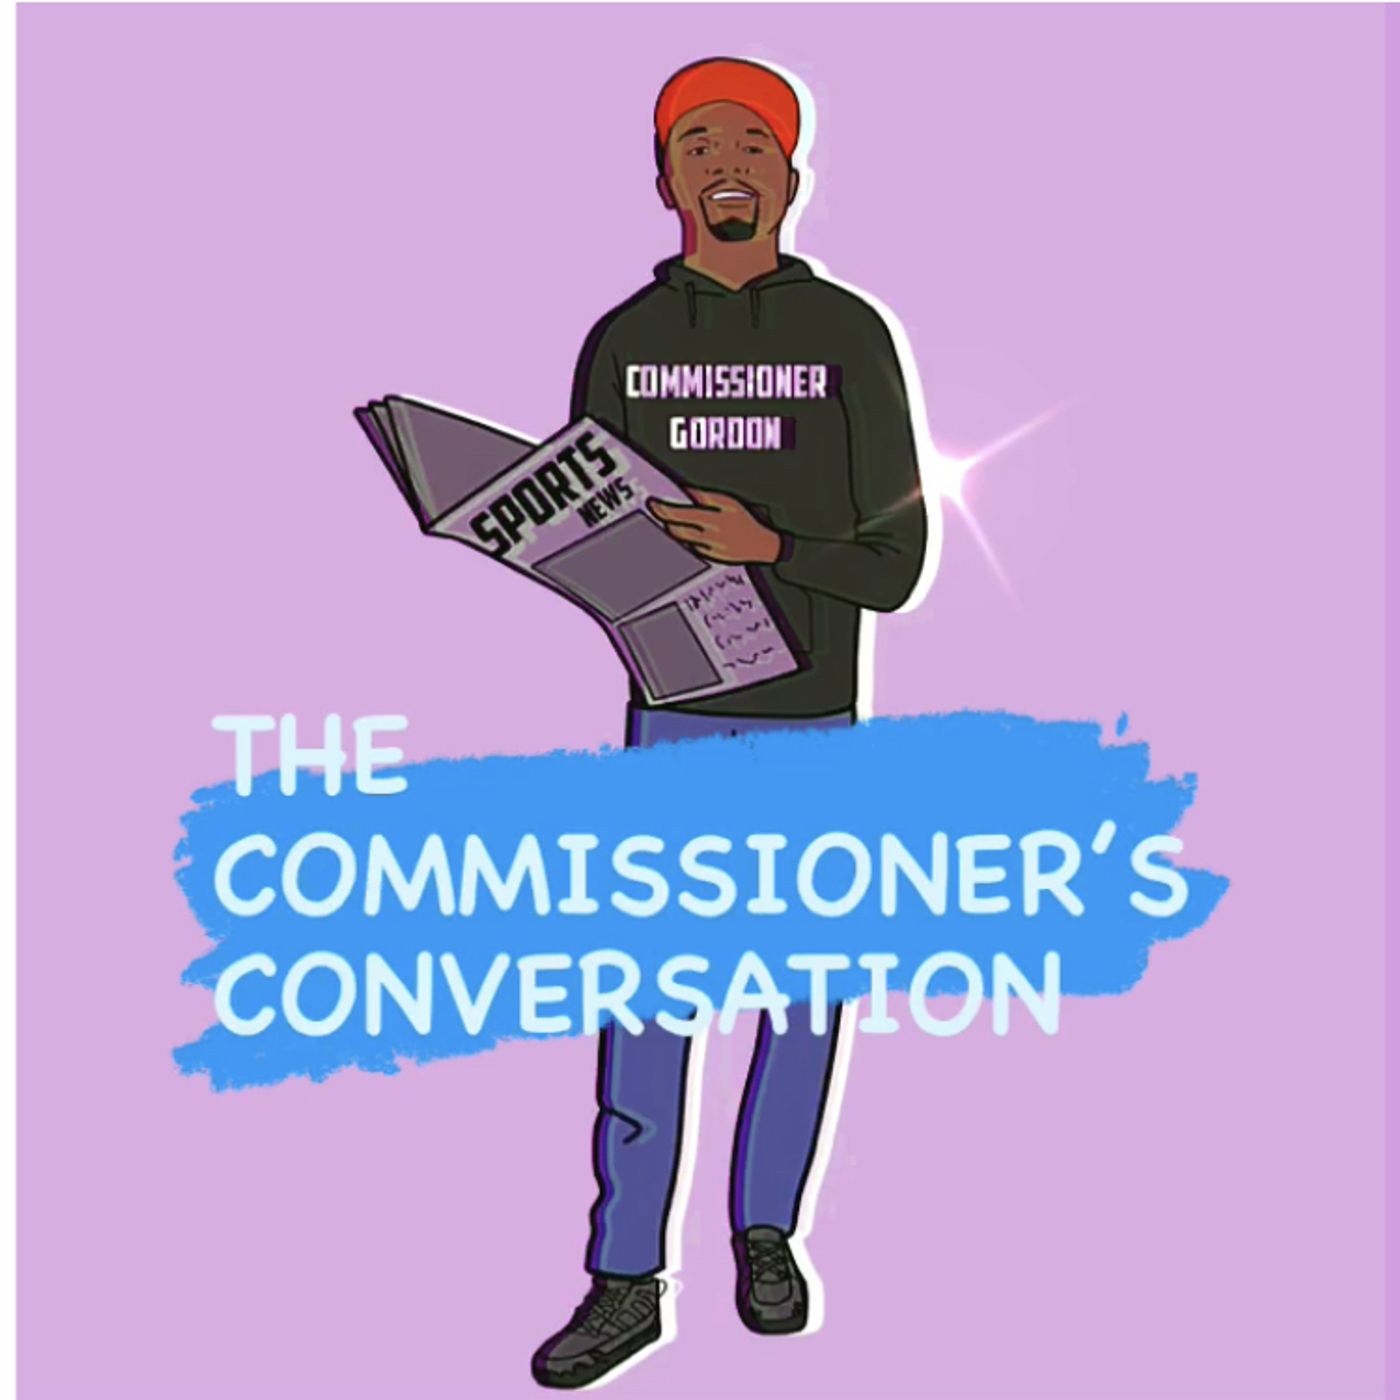 S2 Ep65: The Commissioner’s Conversation (09/08/21) featuring Jarvis Davis